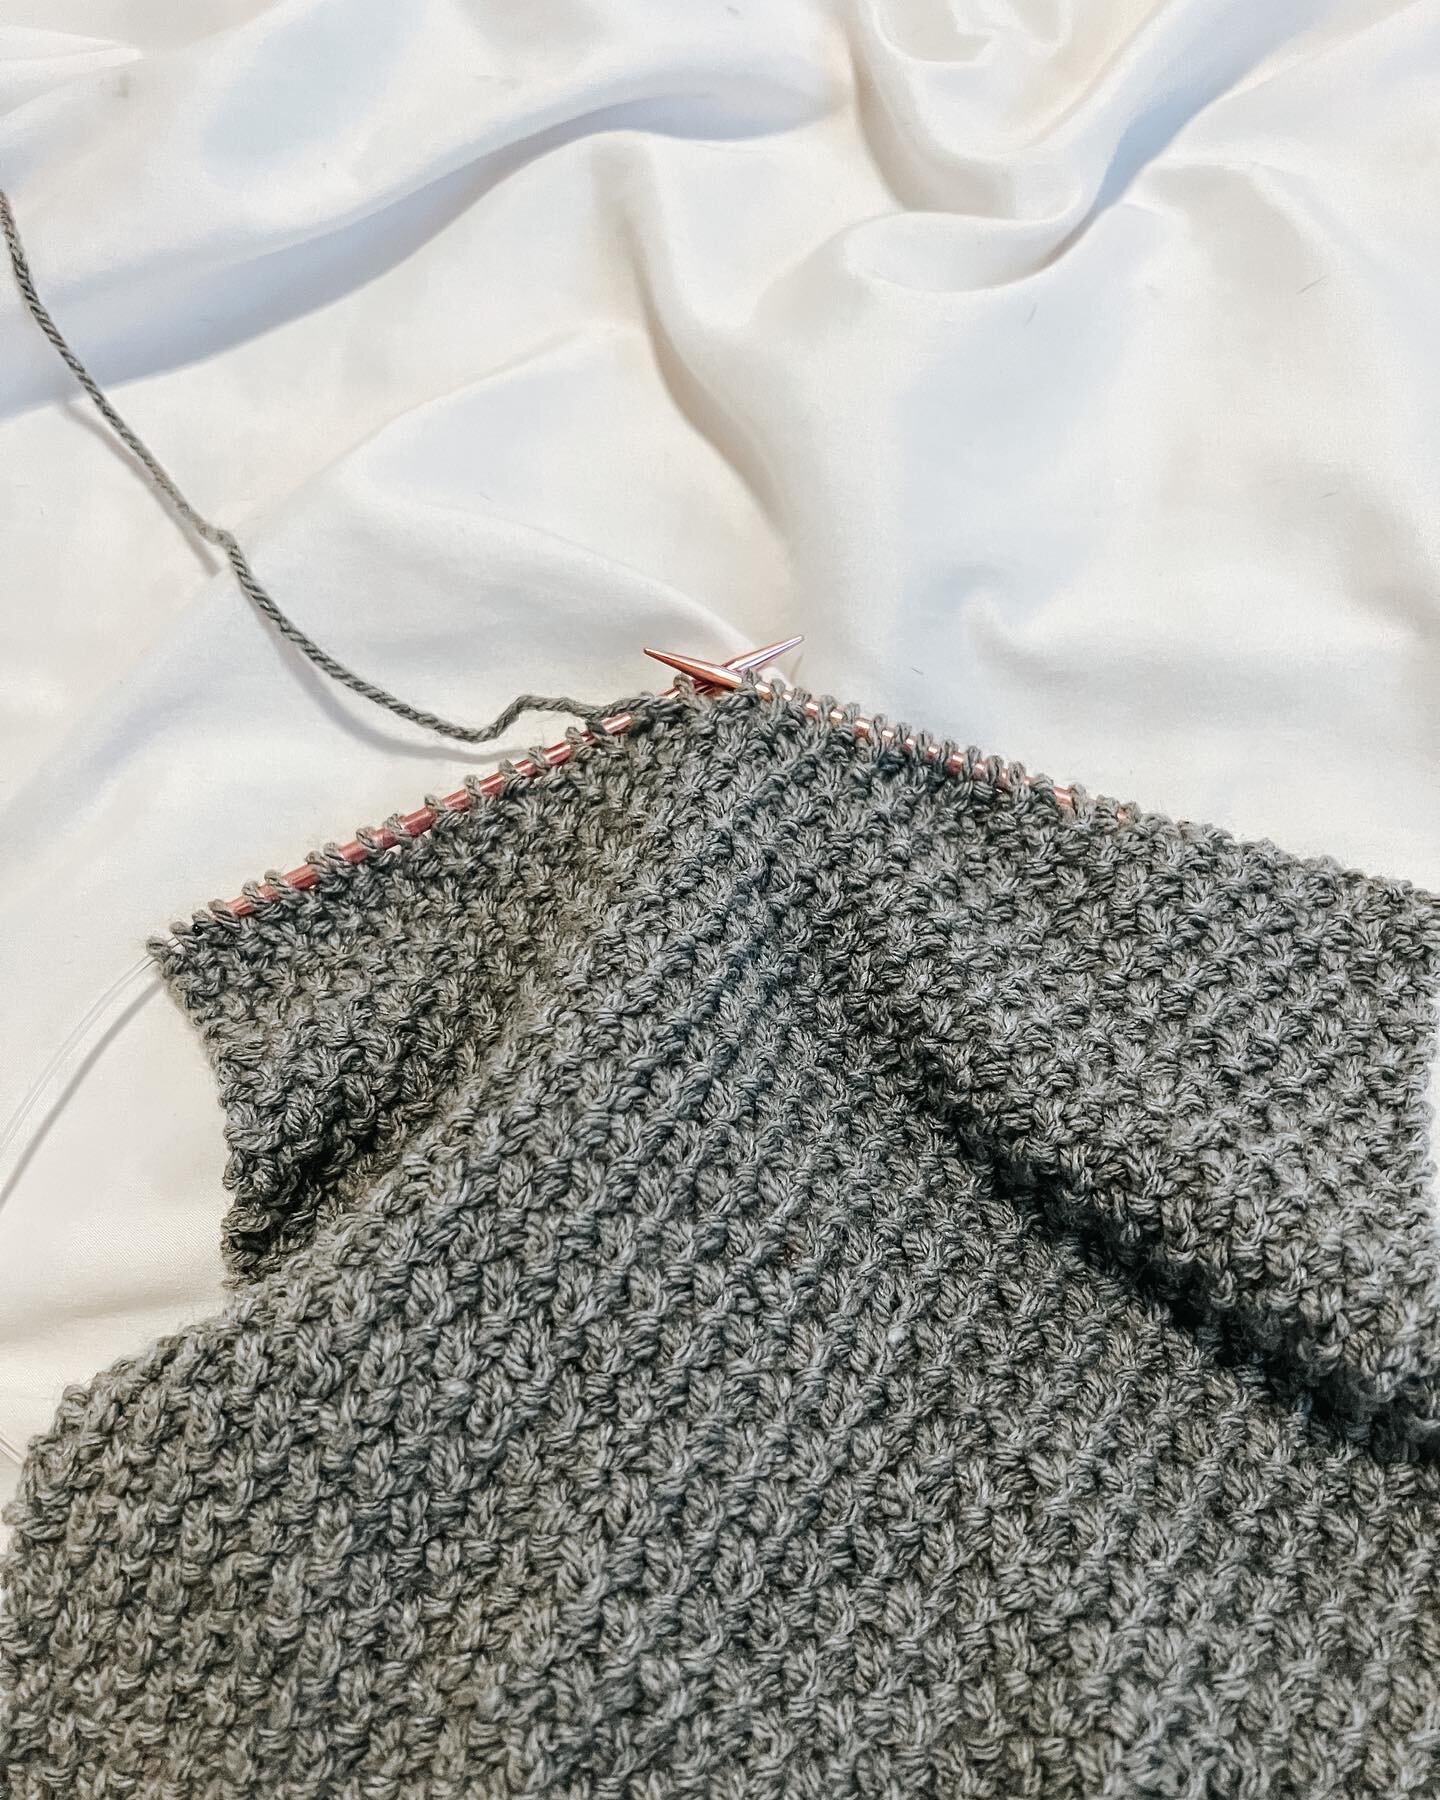 I&rsquo;m switching it up a bit over here and decided to teach myself how to knit 🧶
&bull;
I&rsquo;ve made wash clothes and simple swatches in the past, but I&rsquo;m finally making a real piece, a scarf for my boyfriend &hearts;️ it took a lot of p